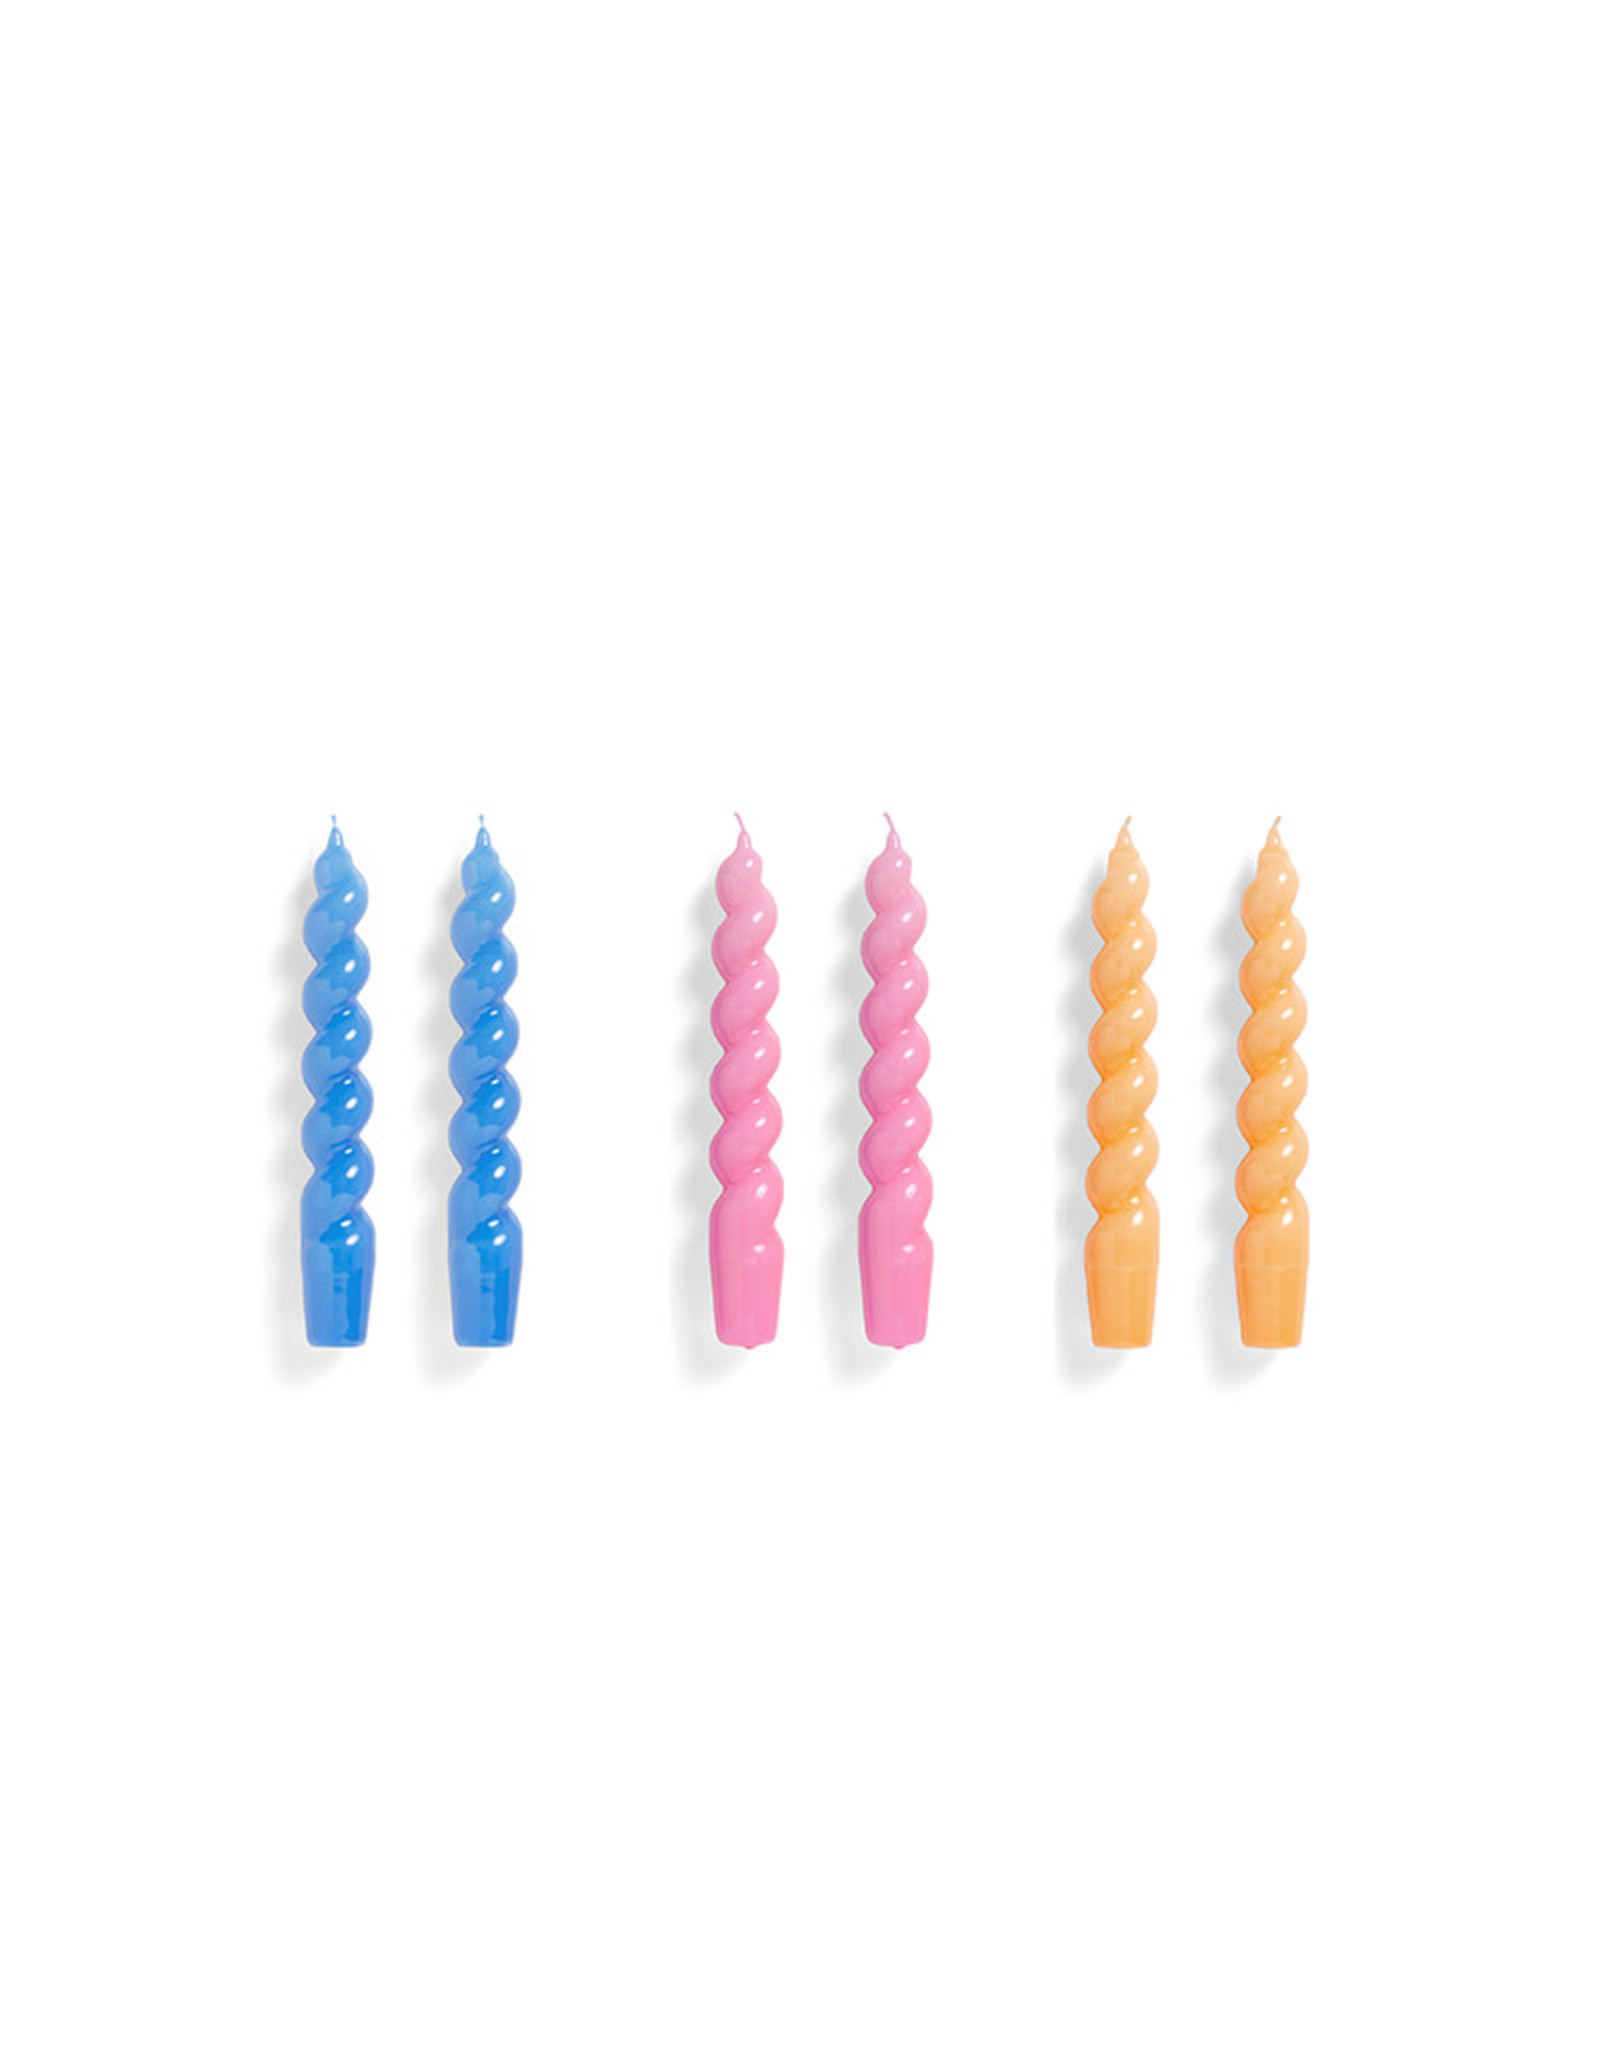 HAY Candle Spiral - Set of 6 - Blue/Pink/Peach